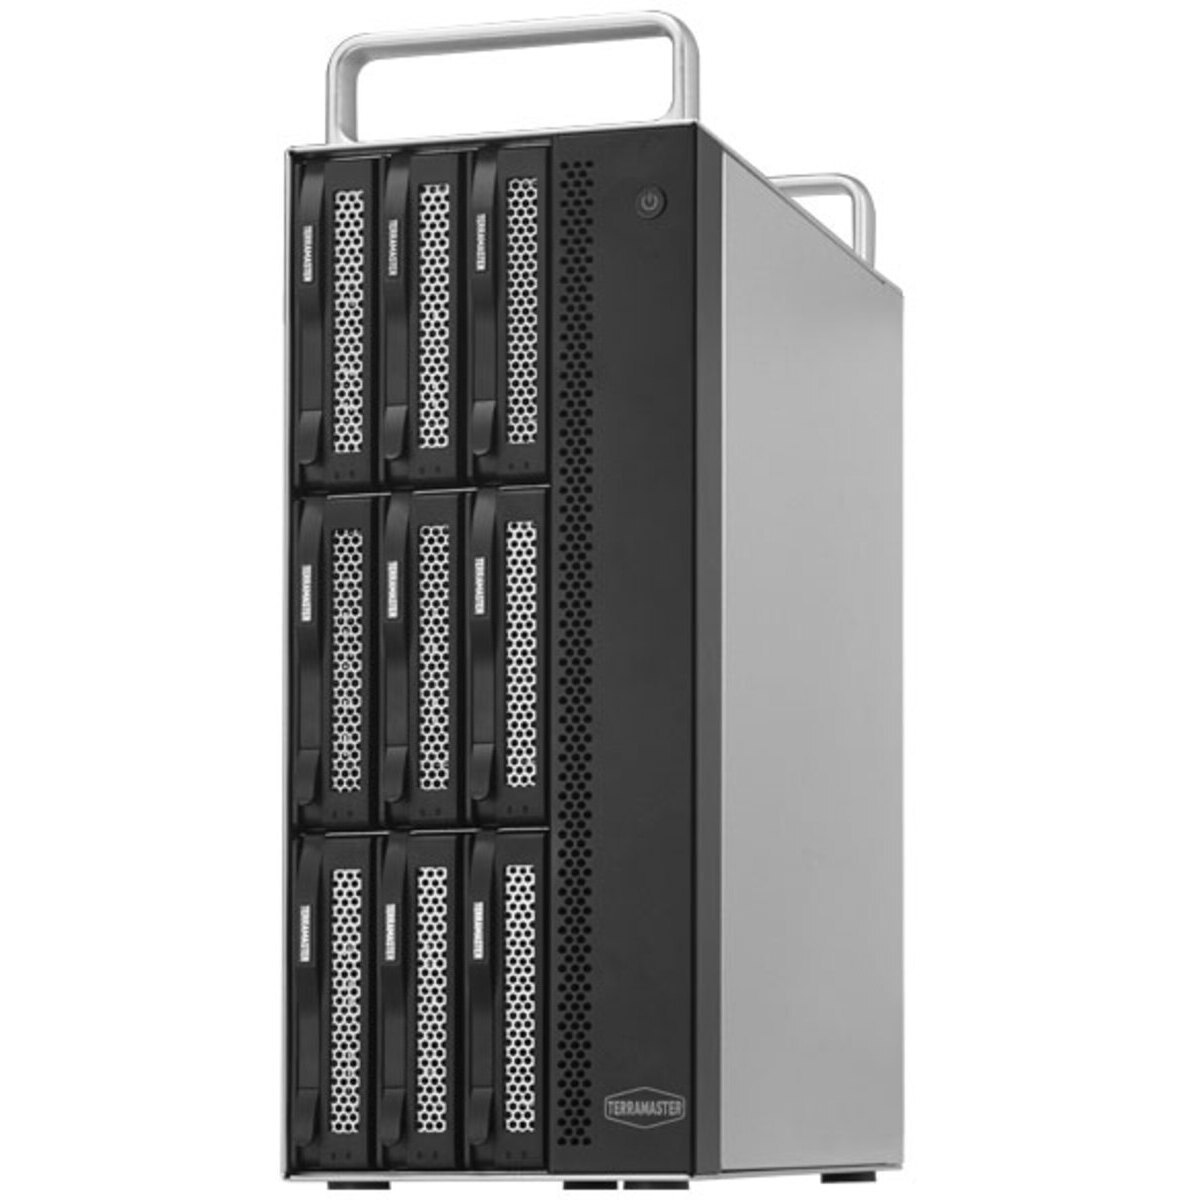 TerraMaster D8-322 144tb 8-Bay Desktop Multimedia / Power User / Business DAS - Direct Attached Storage Device 8x18tb Seagate EXOS X18 ST18000NM000J 3.5 7200rpm SATA 6Gb/s HDD ENTERPRISE Class Drives Installed - Burn-In Tested D8-322